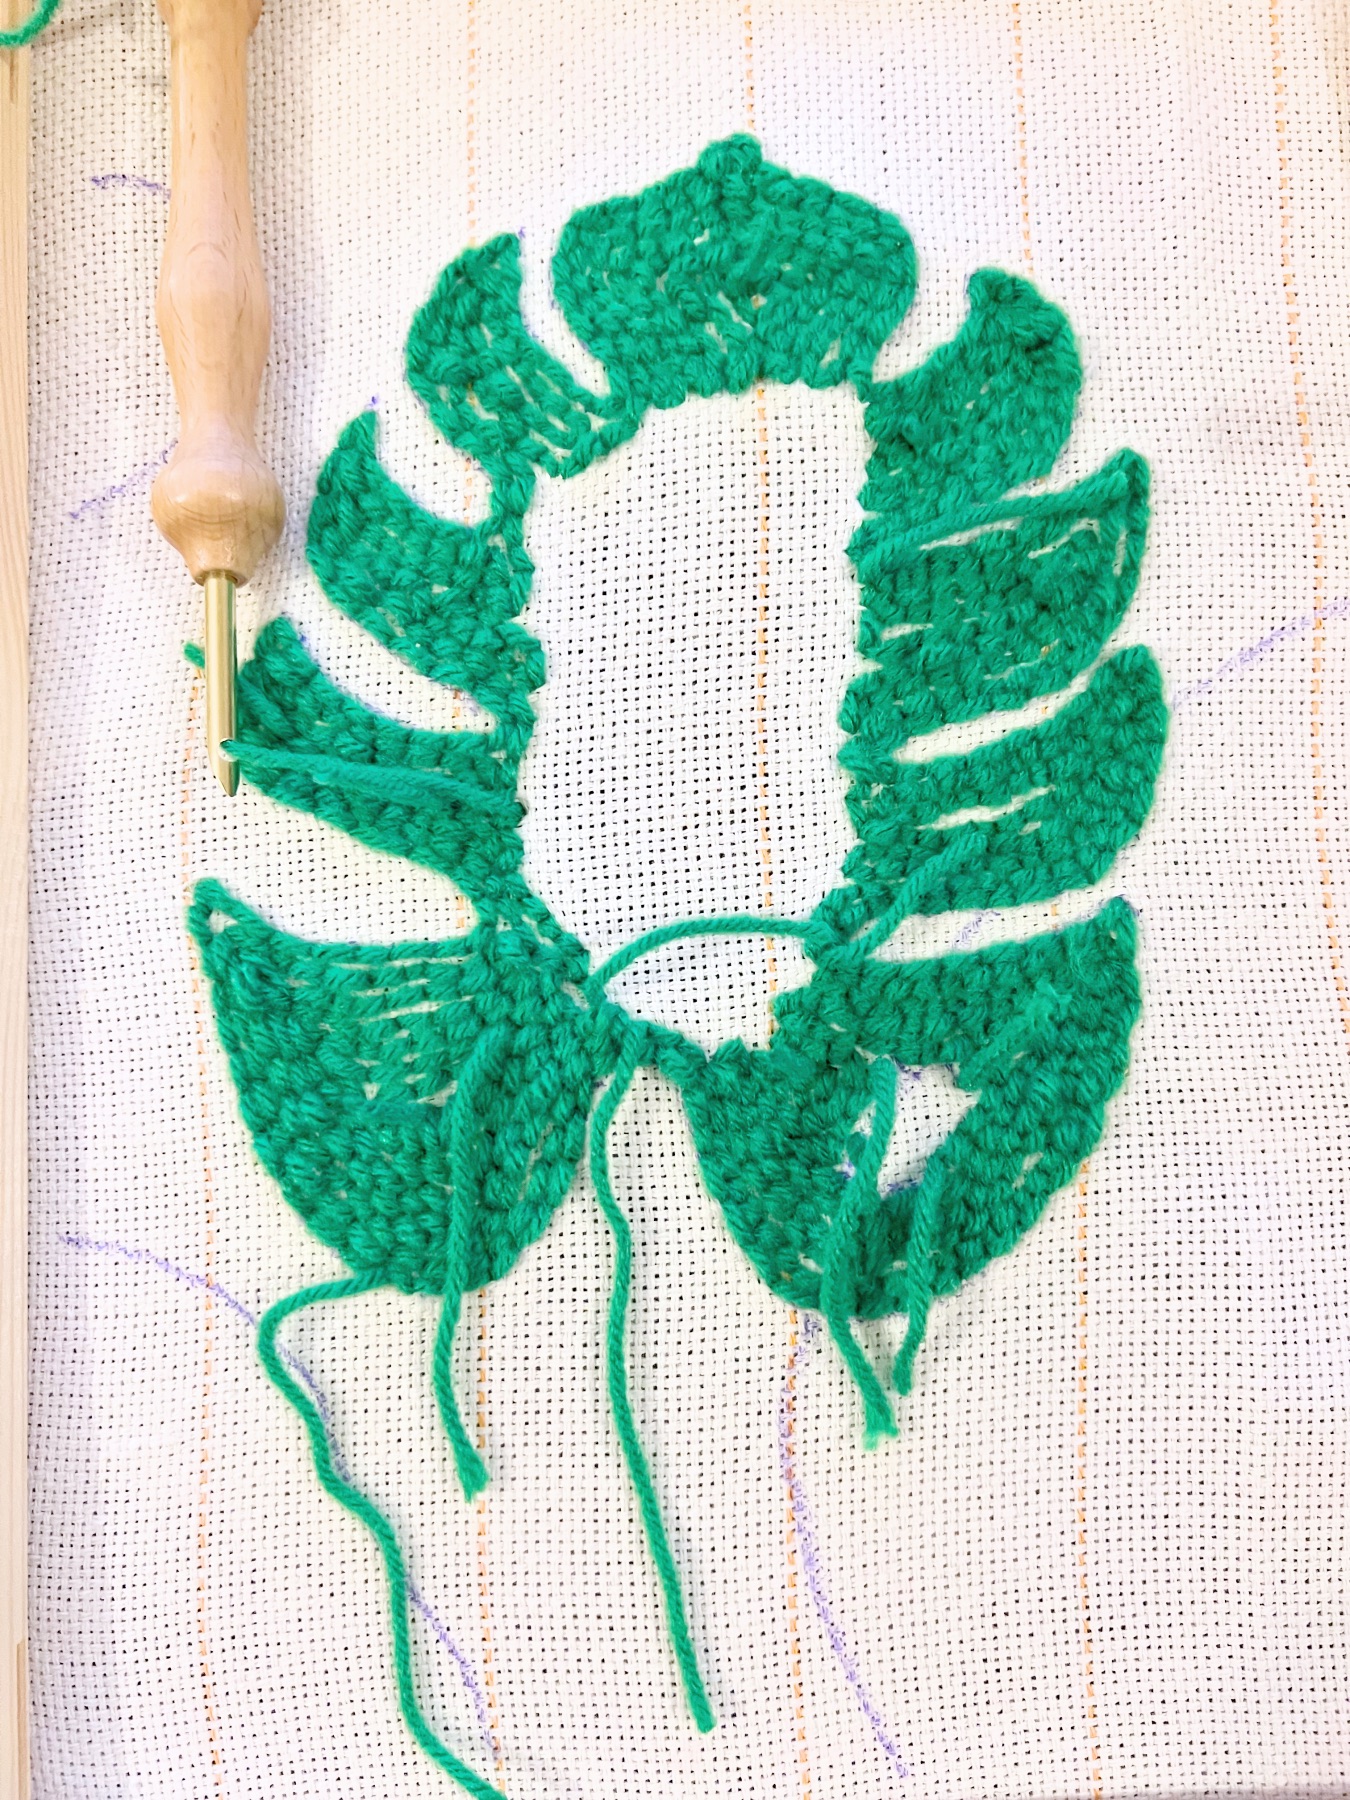 fill in the monstera leaf stitching